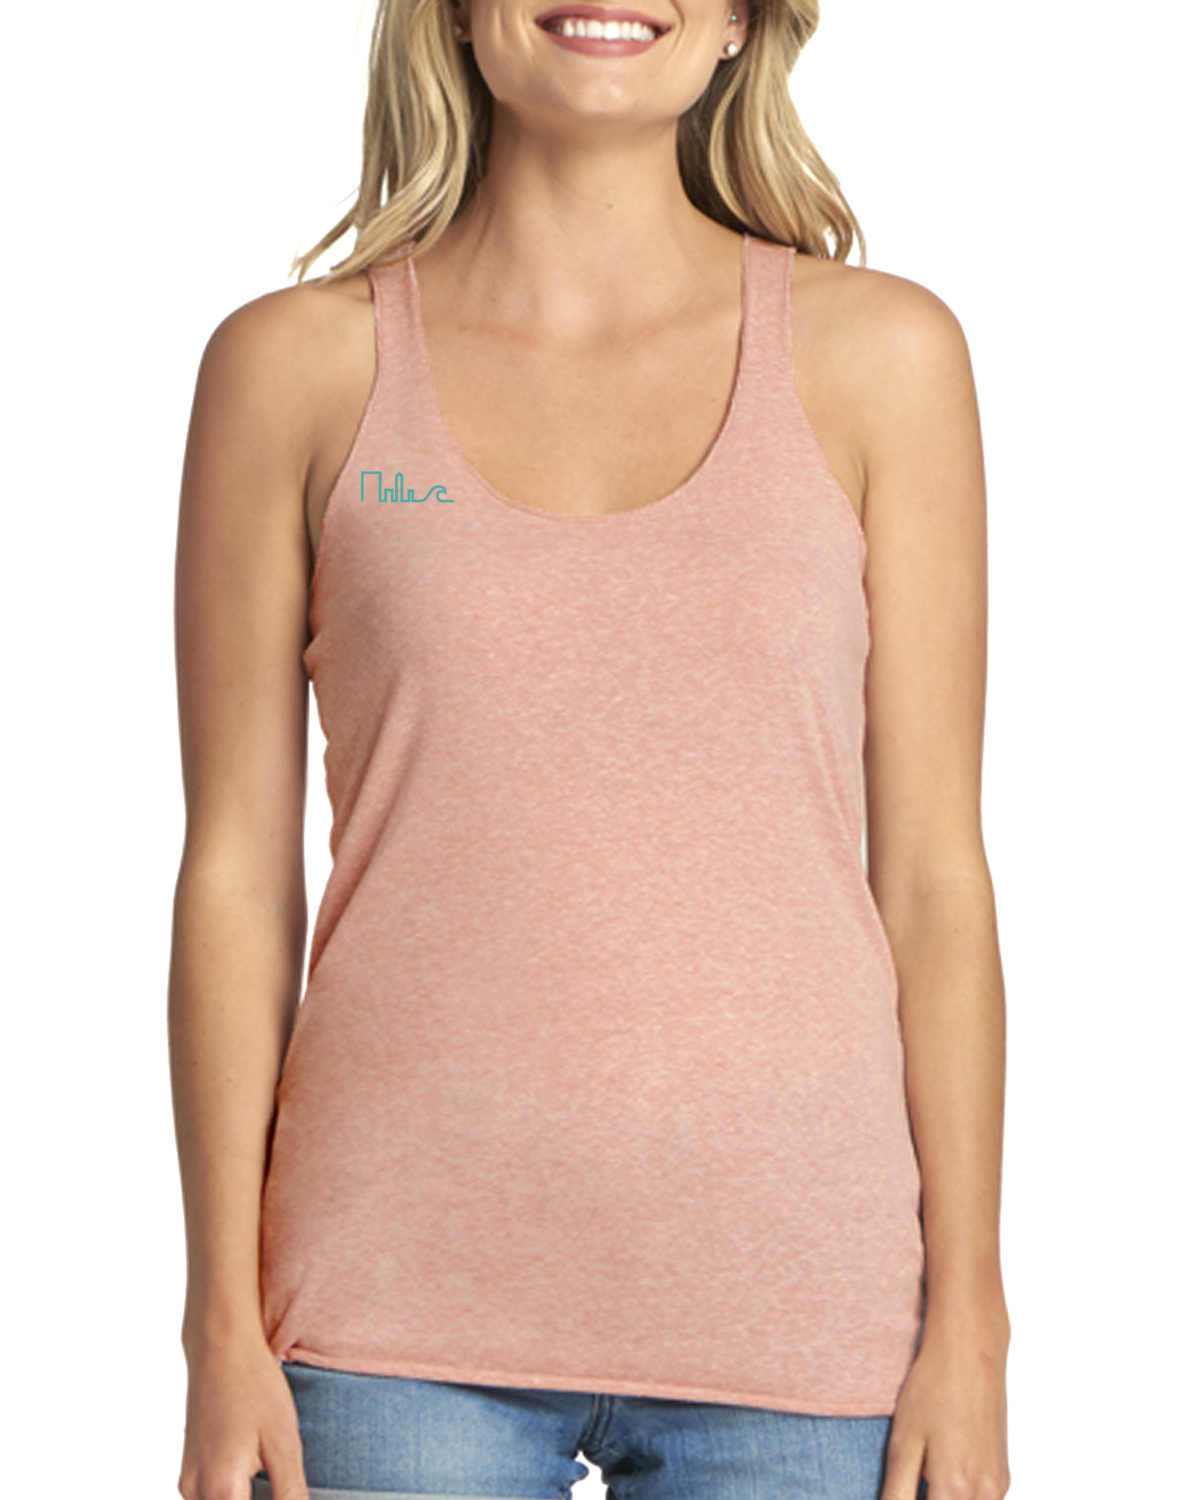 pink-tank-front copy